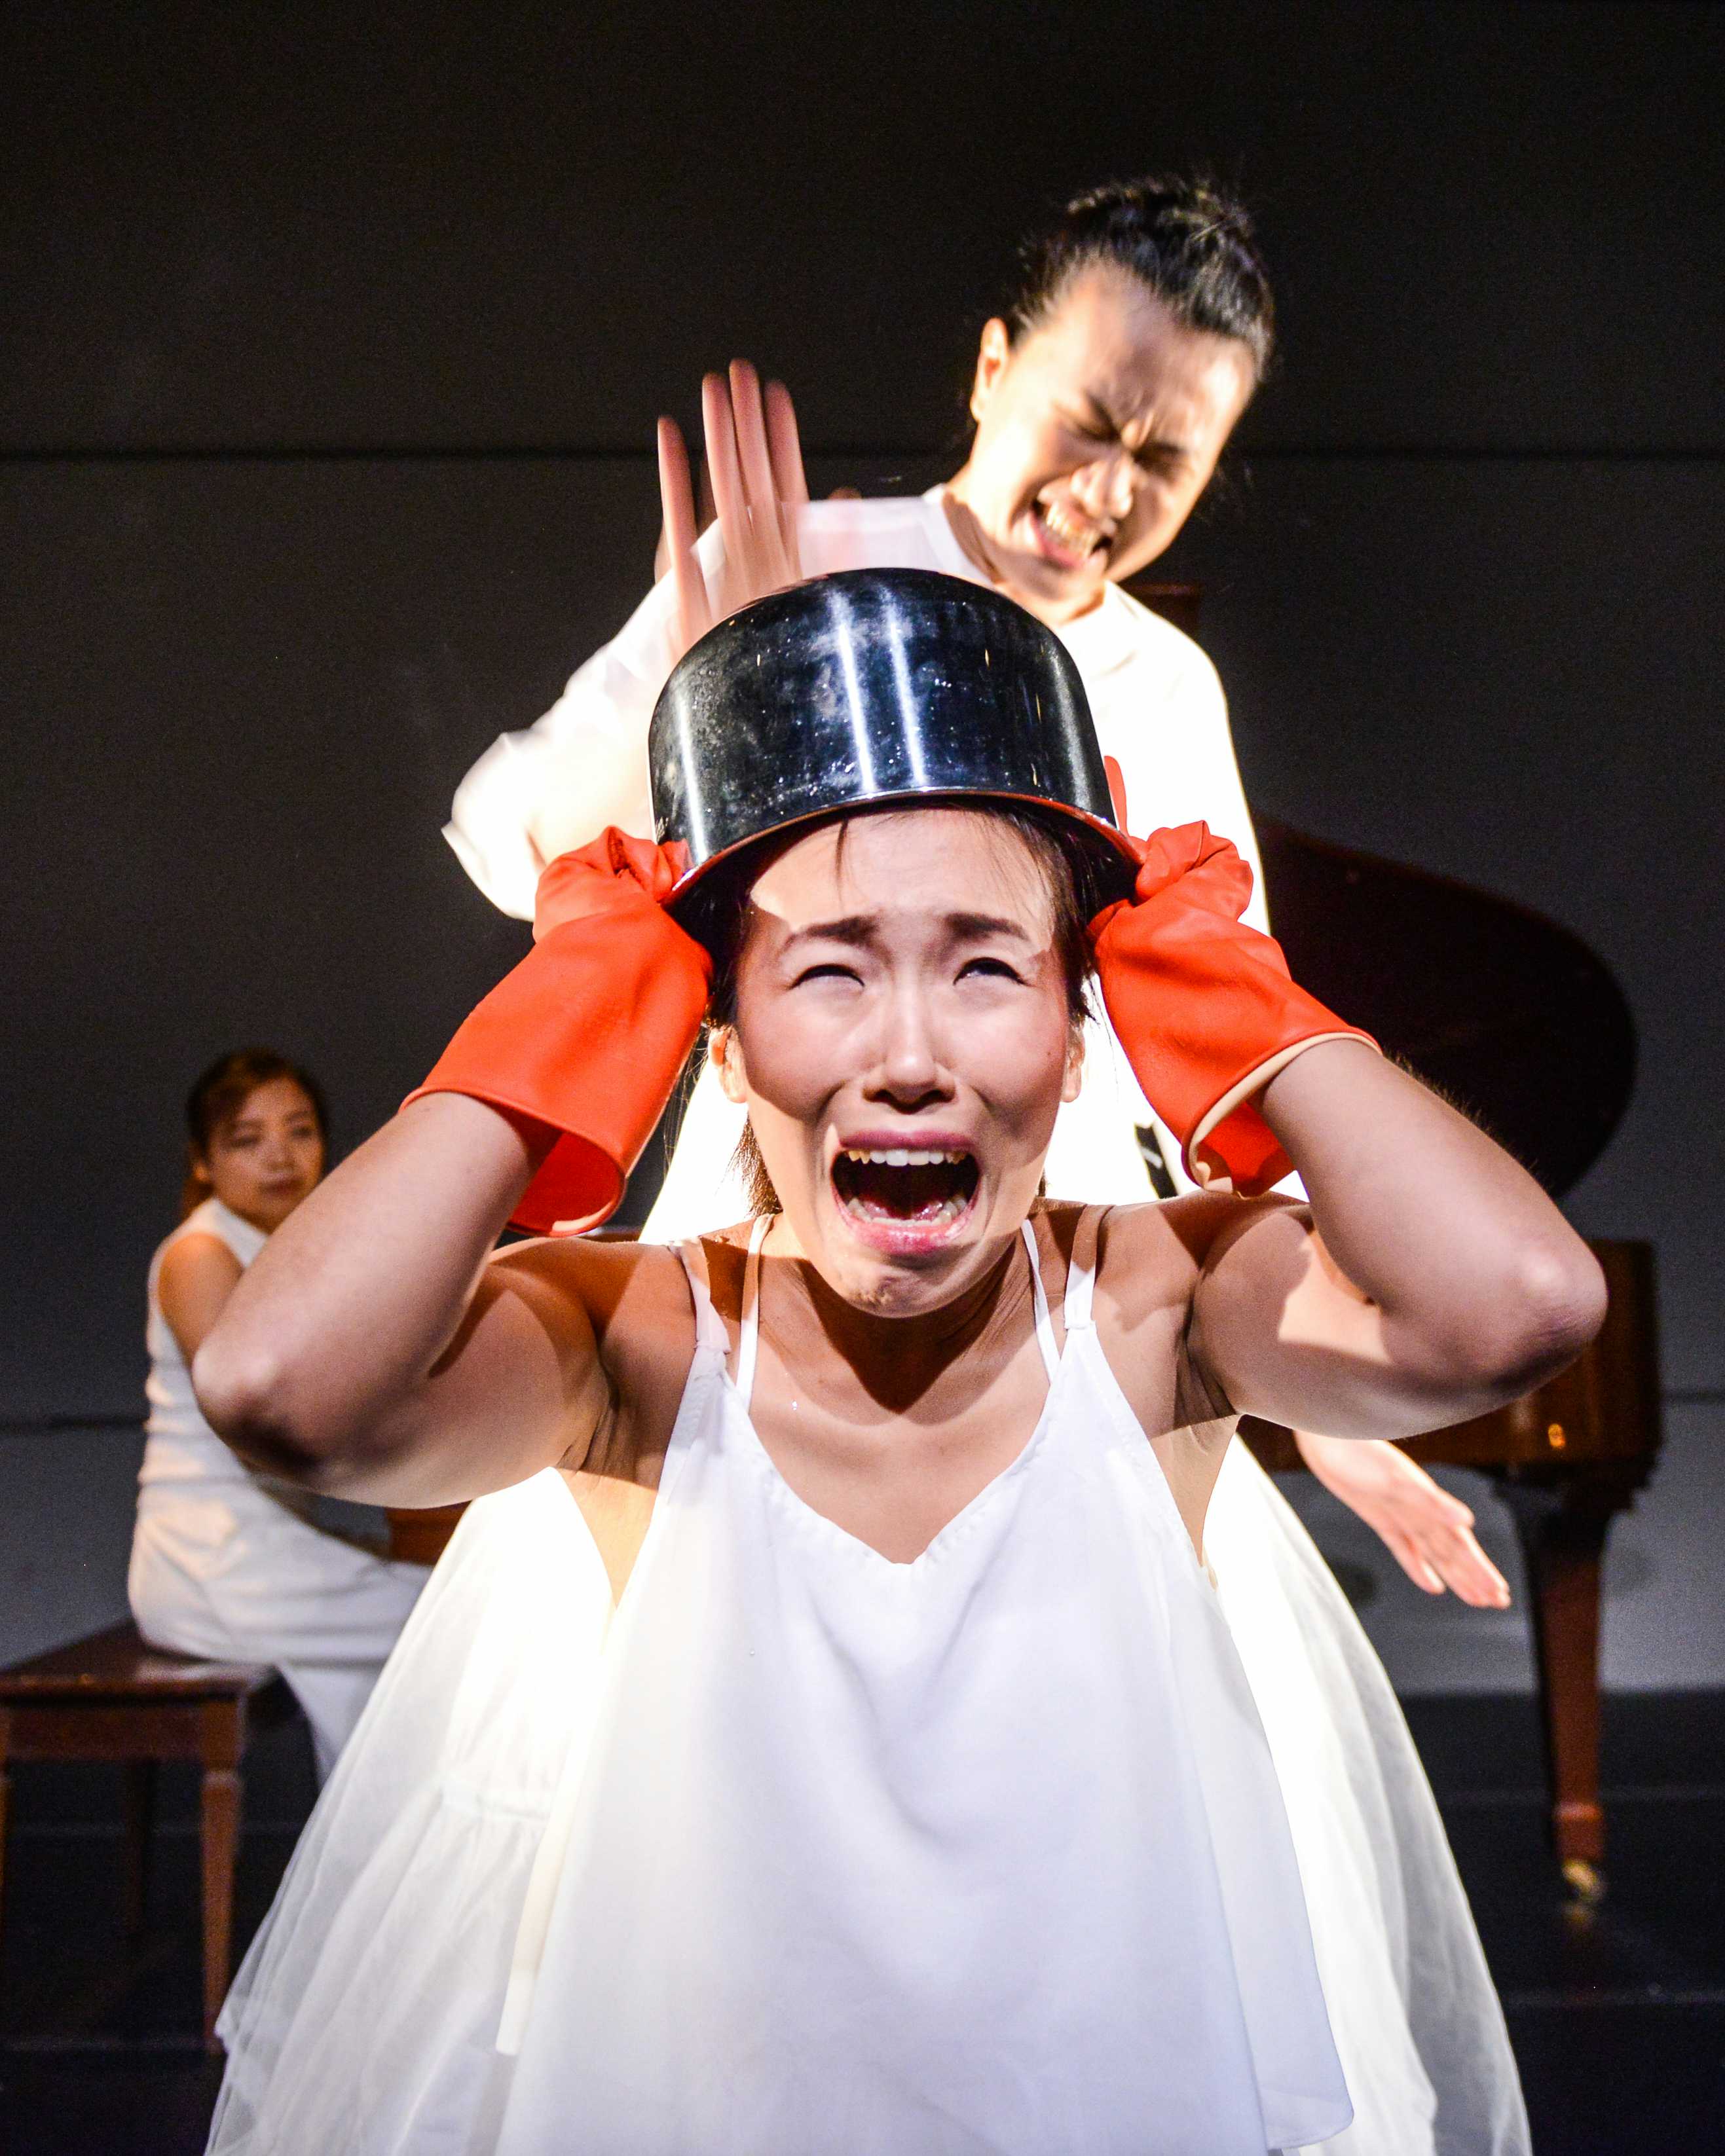 Do you think it's right that I should have to wash it? | Featuring: Isabella Leung, Karen C. Siu, Michelle Li | Tagged as: Not The Maids, Show | Photo: Fung Wai Sun |  (Rooftop Productions • Hong Kong Theatre Company)  | Rooftop Productions • Hong Kong Theatre Company